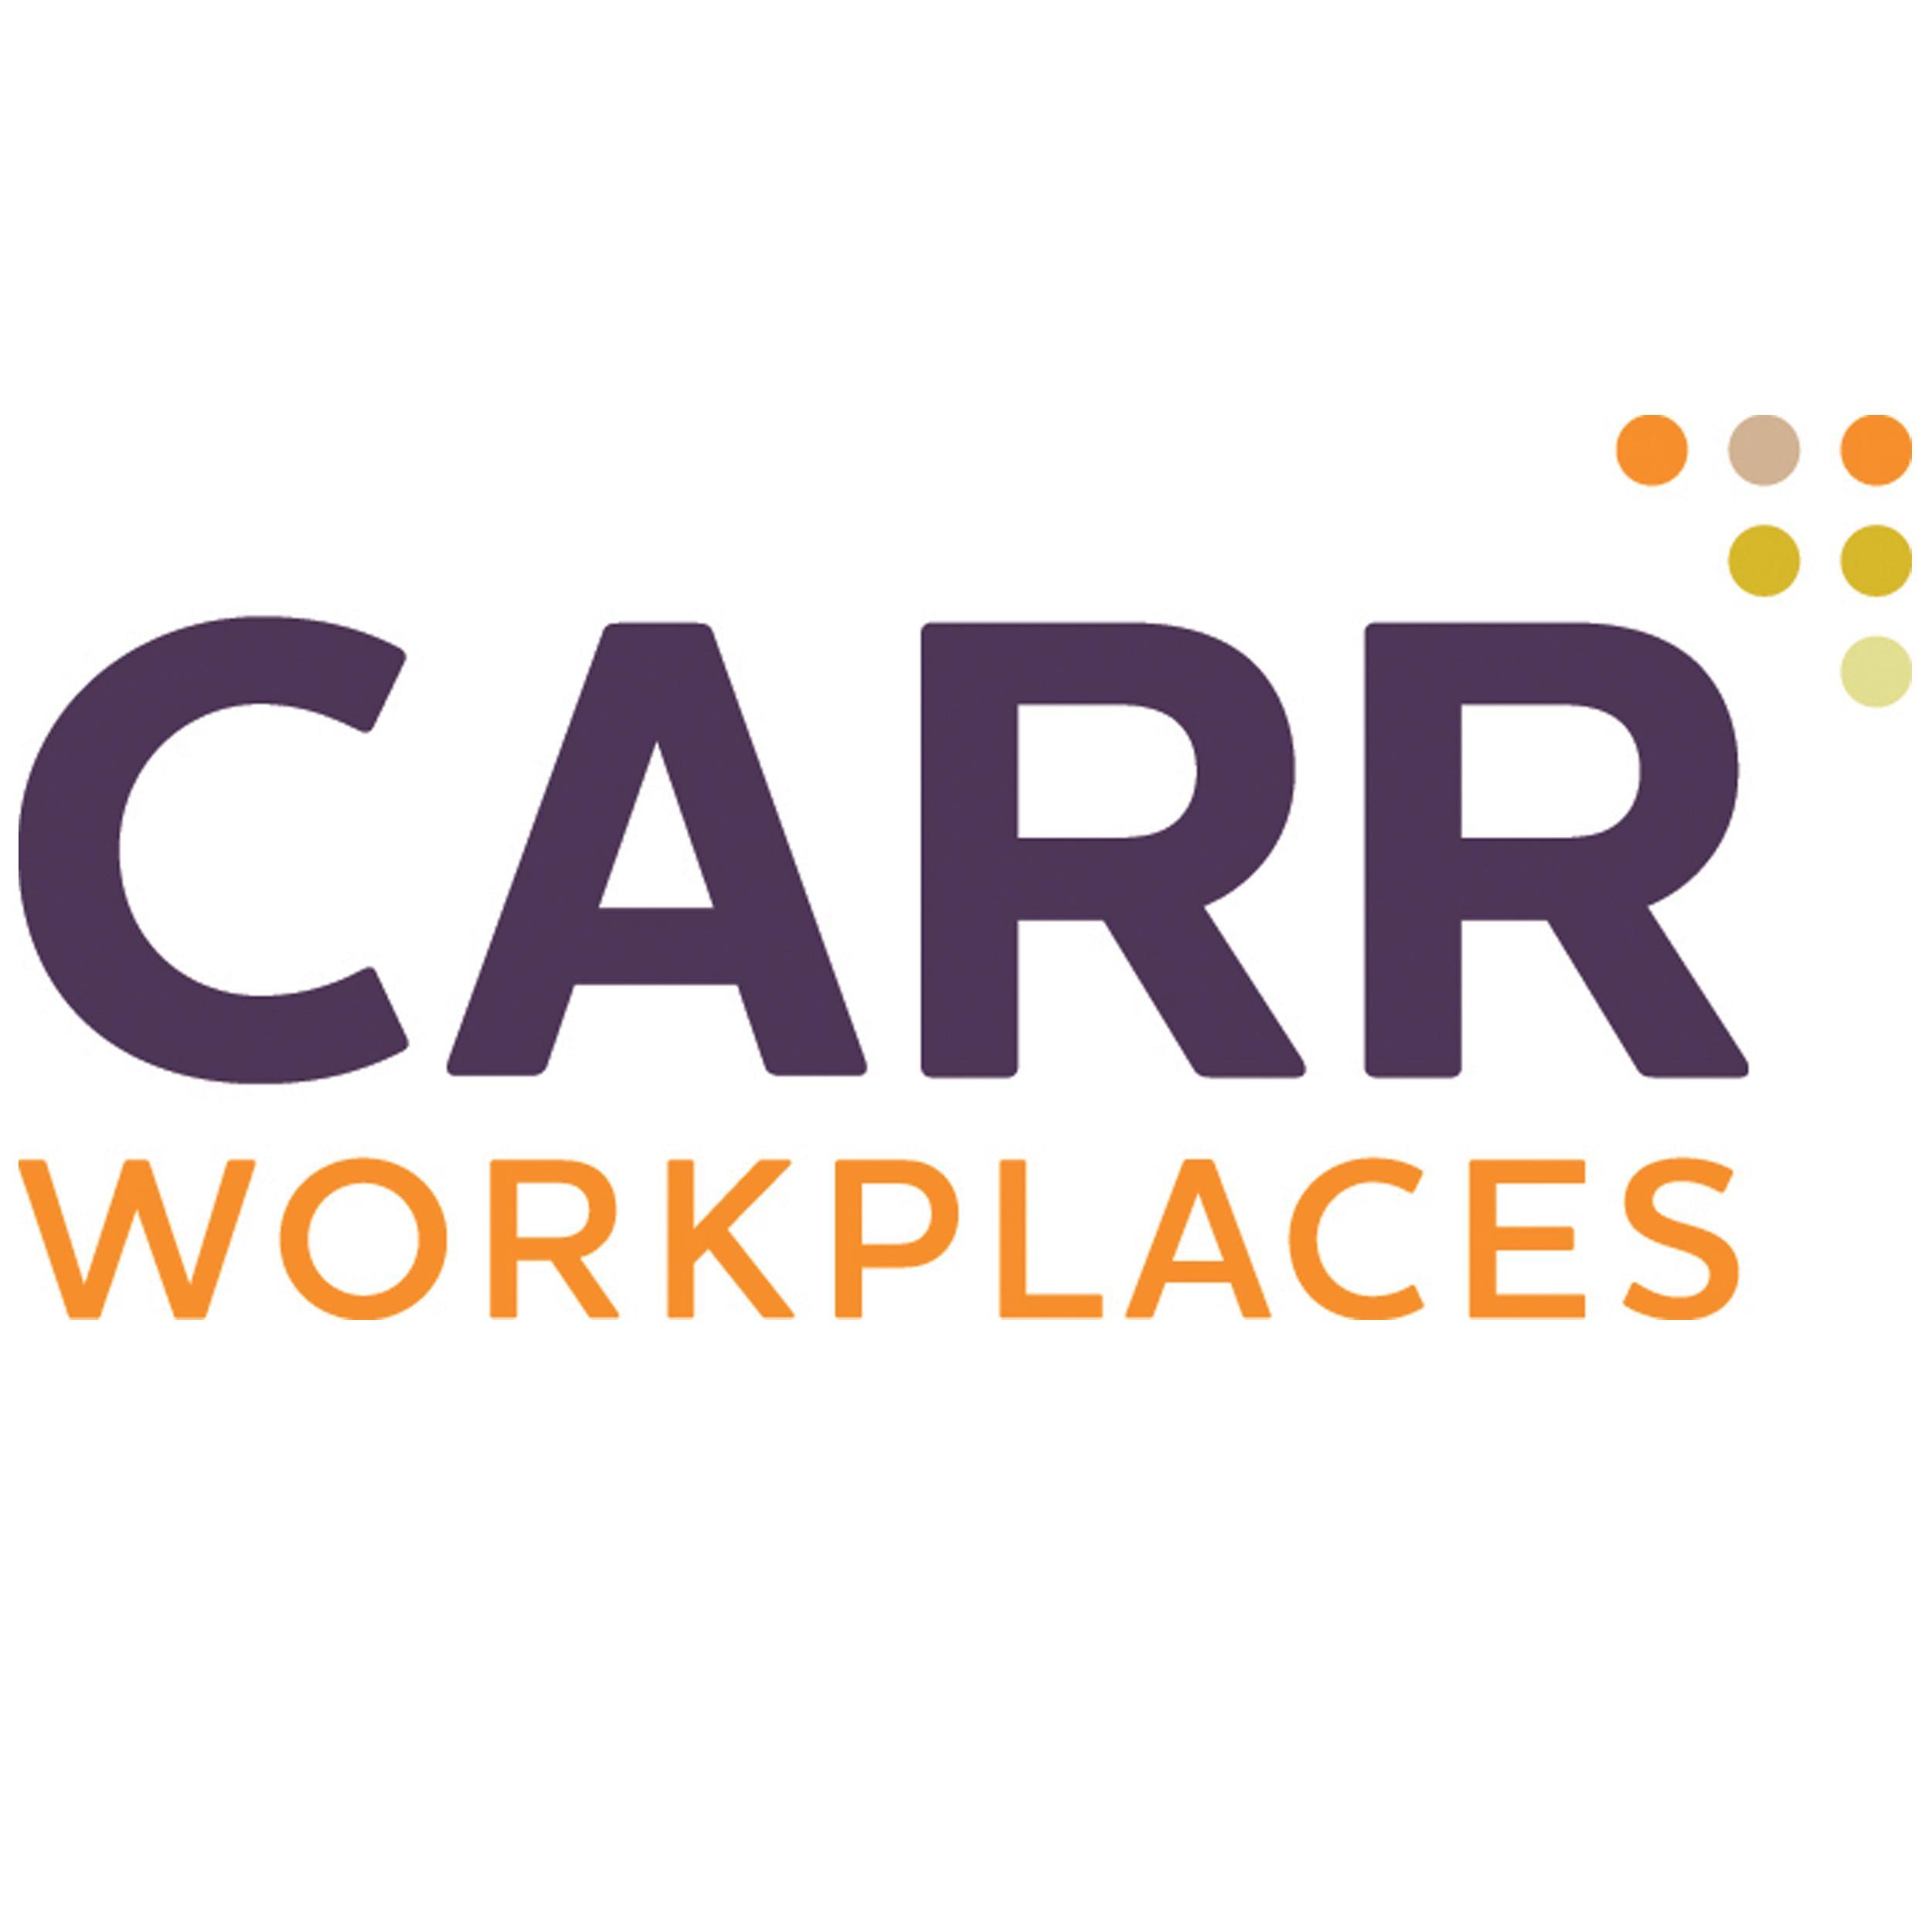 Carr Workplaces provides convenient and beautiful meeting and event spaces throughout  DC, Maryland, and Virginia.